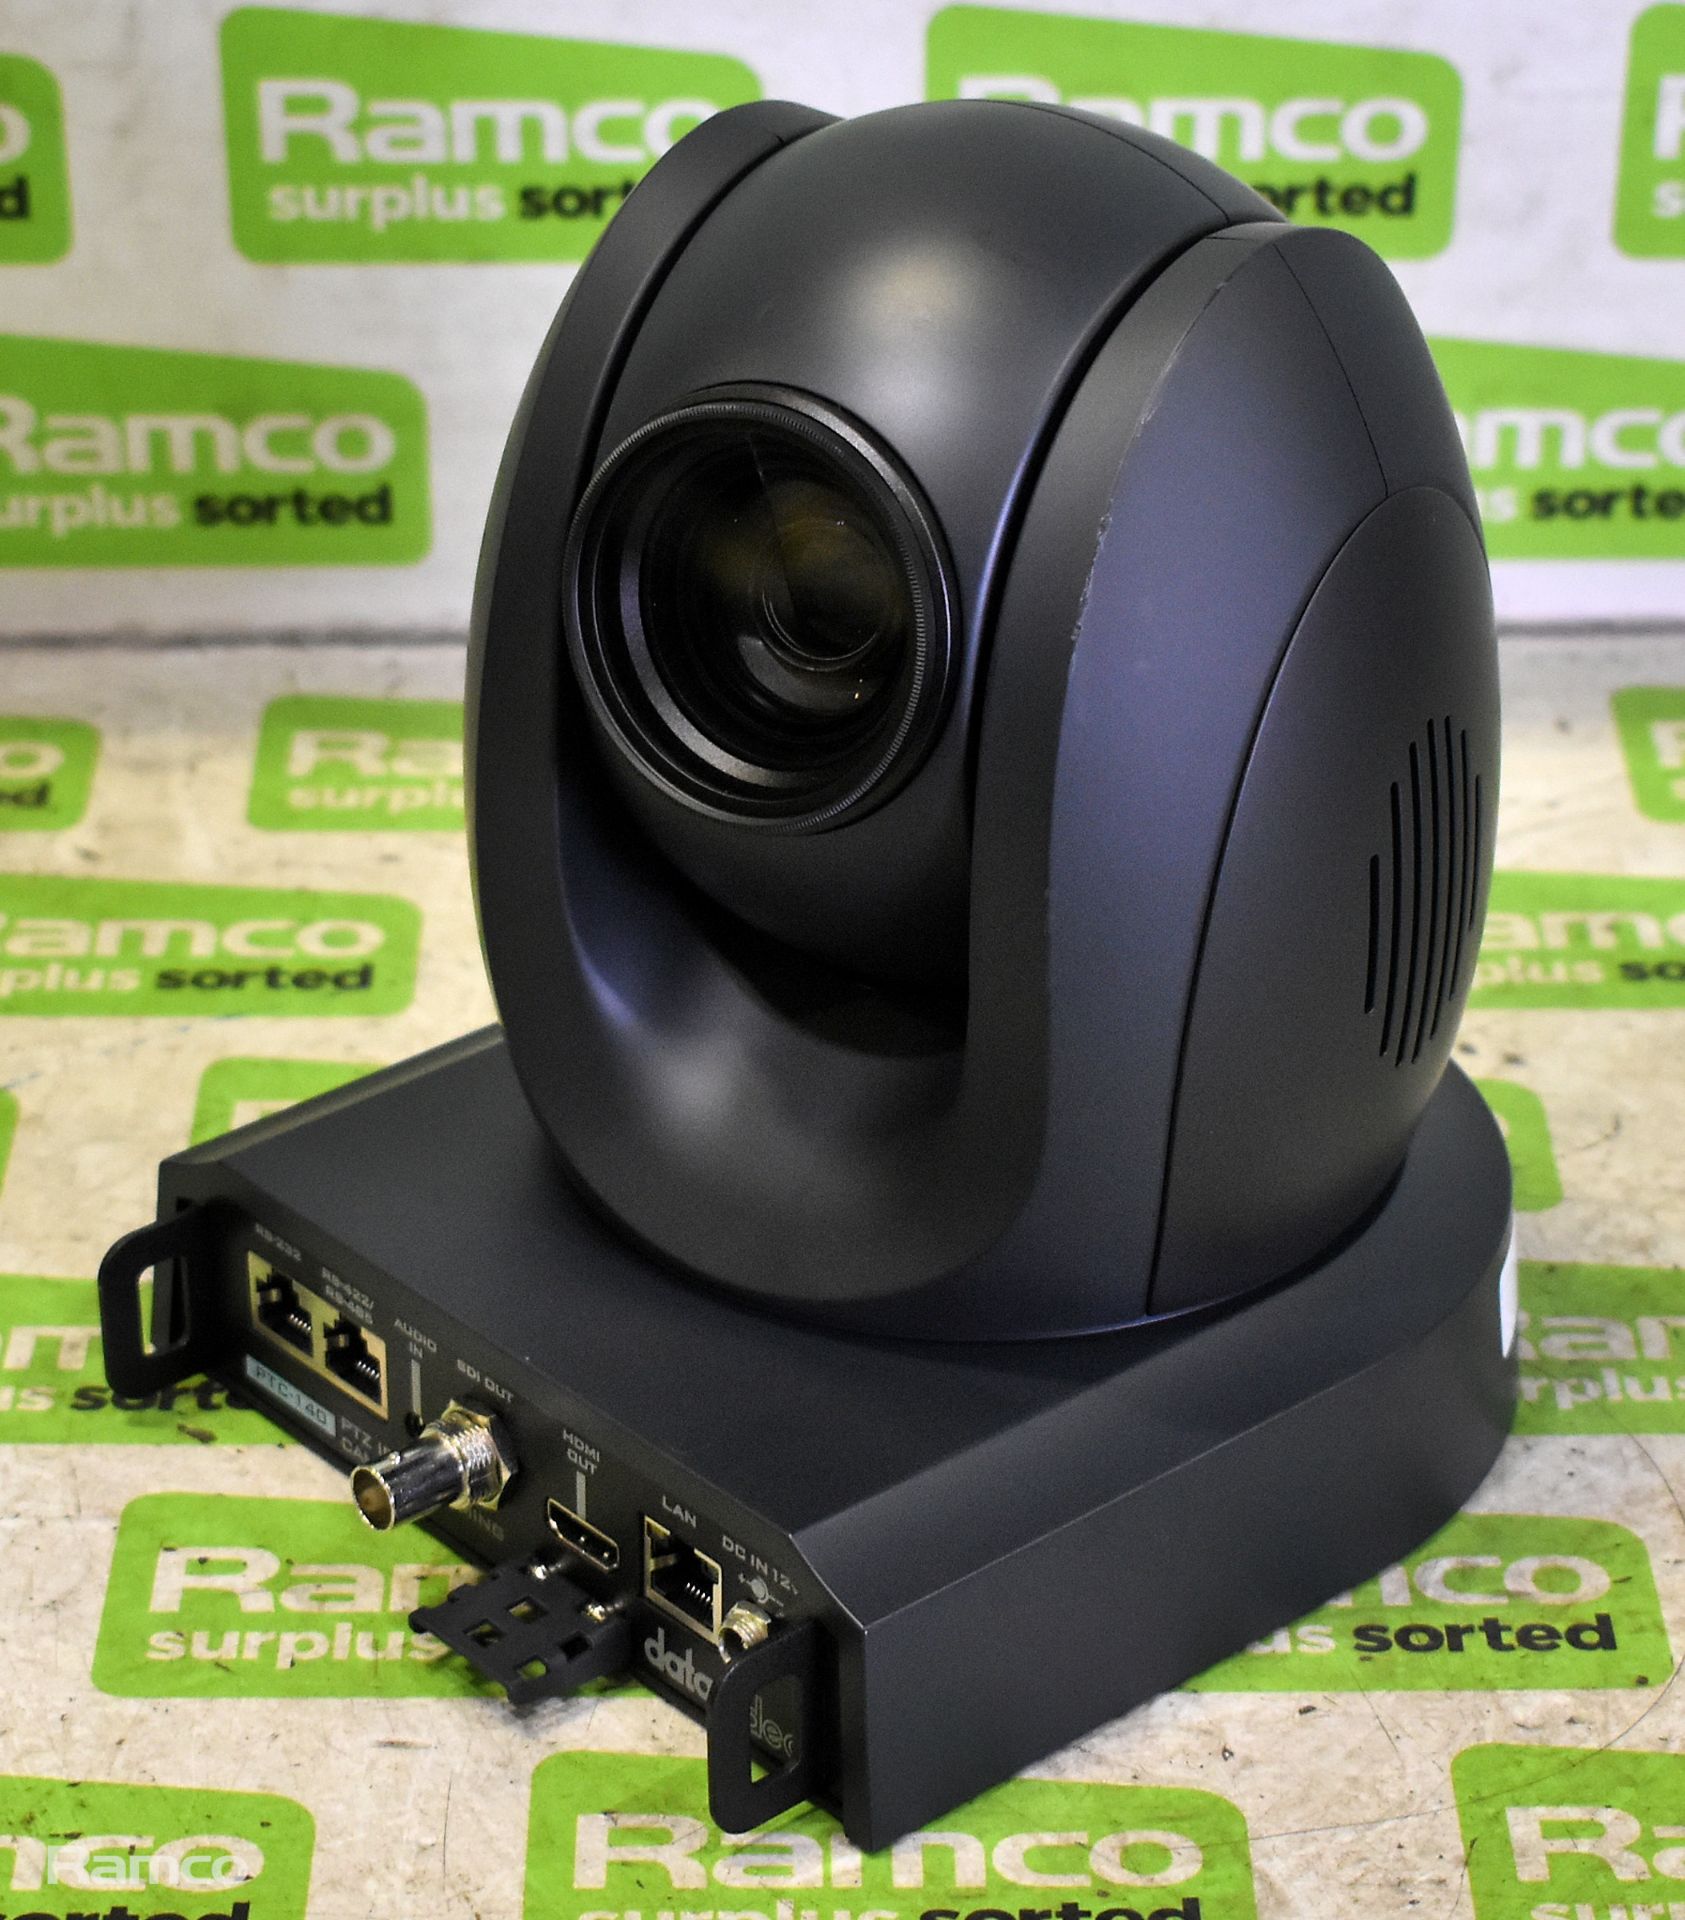 DataVideo PTC-140 HD PTZ IP streaming camera (crack on lens as pictured)